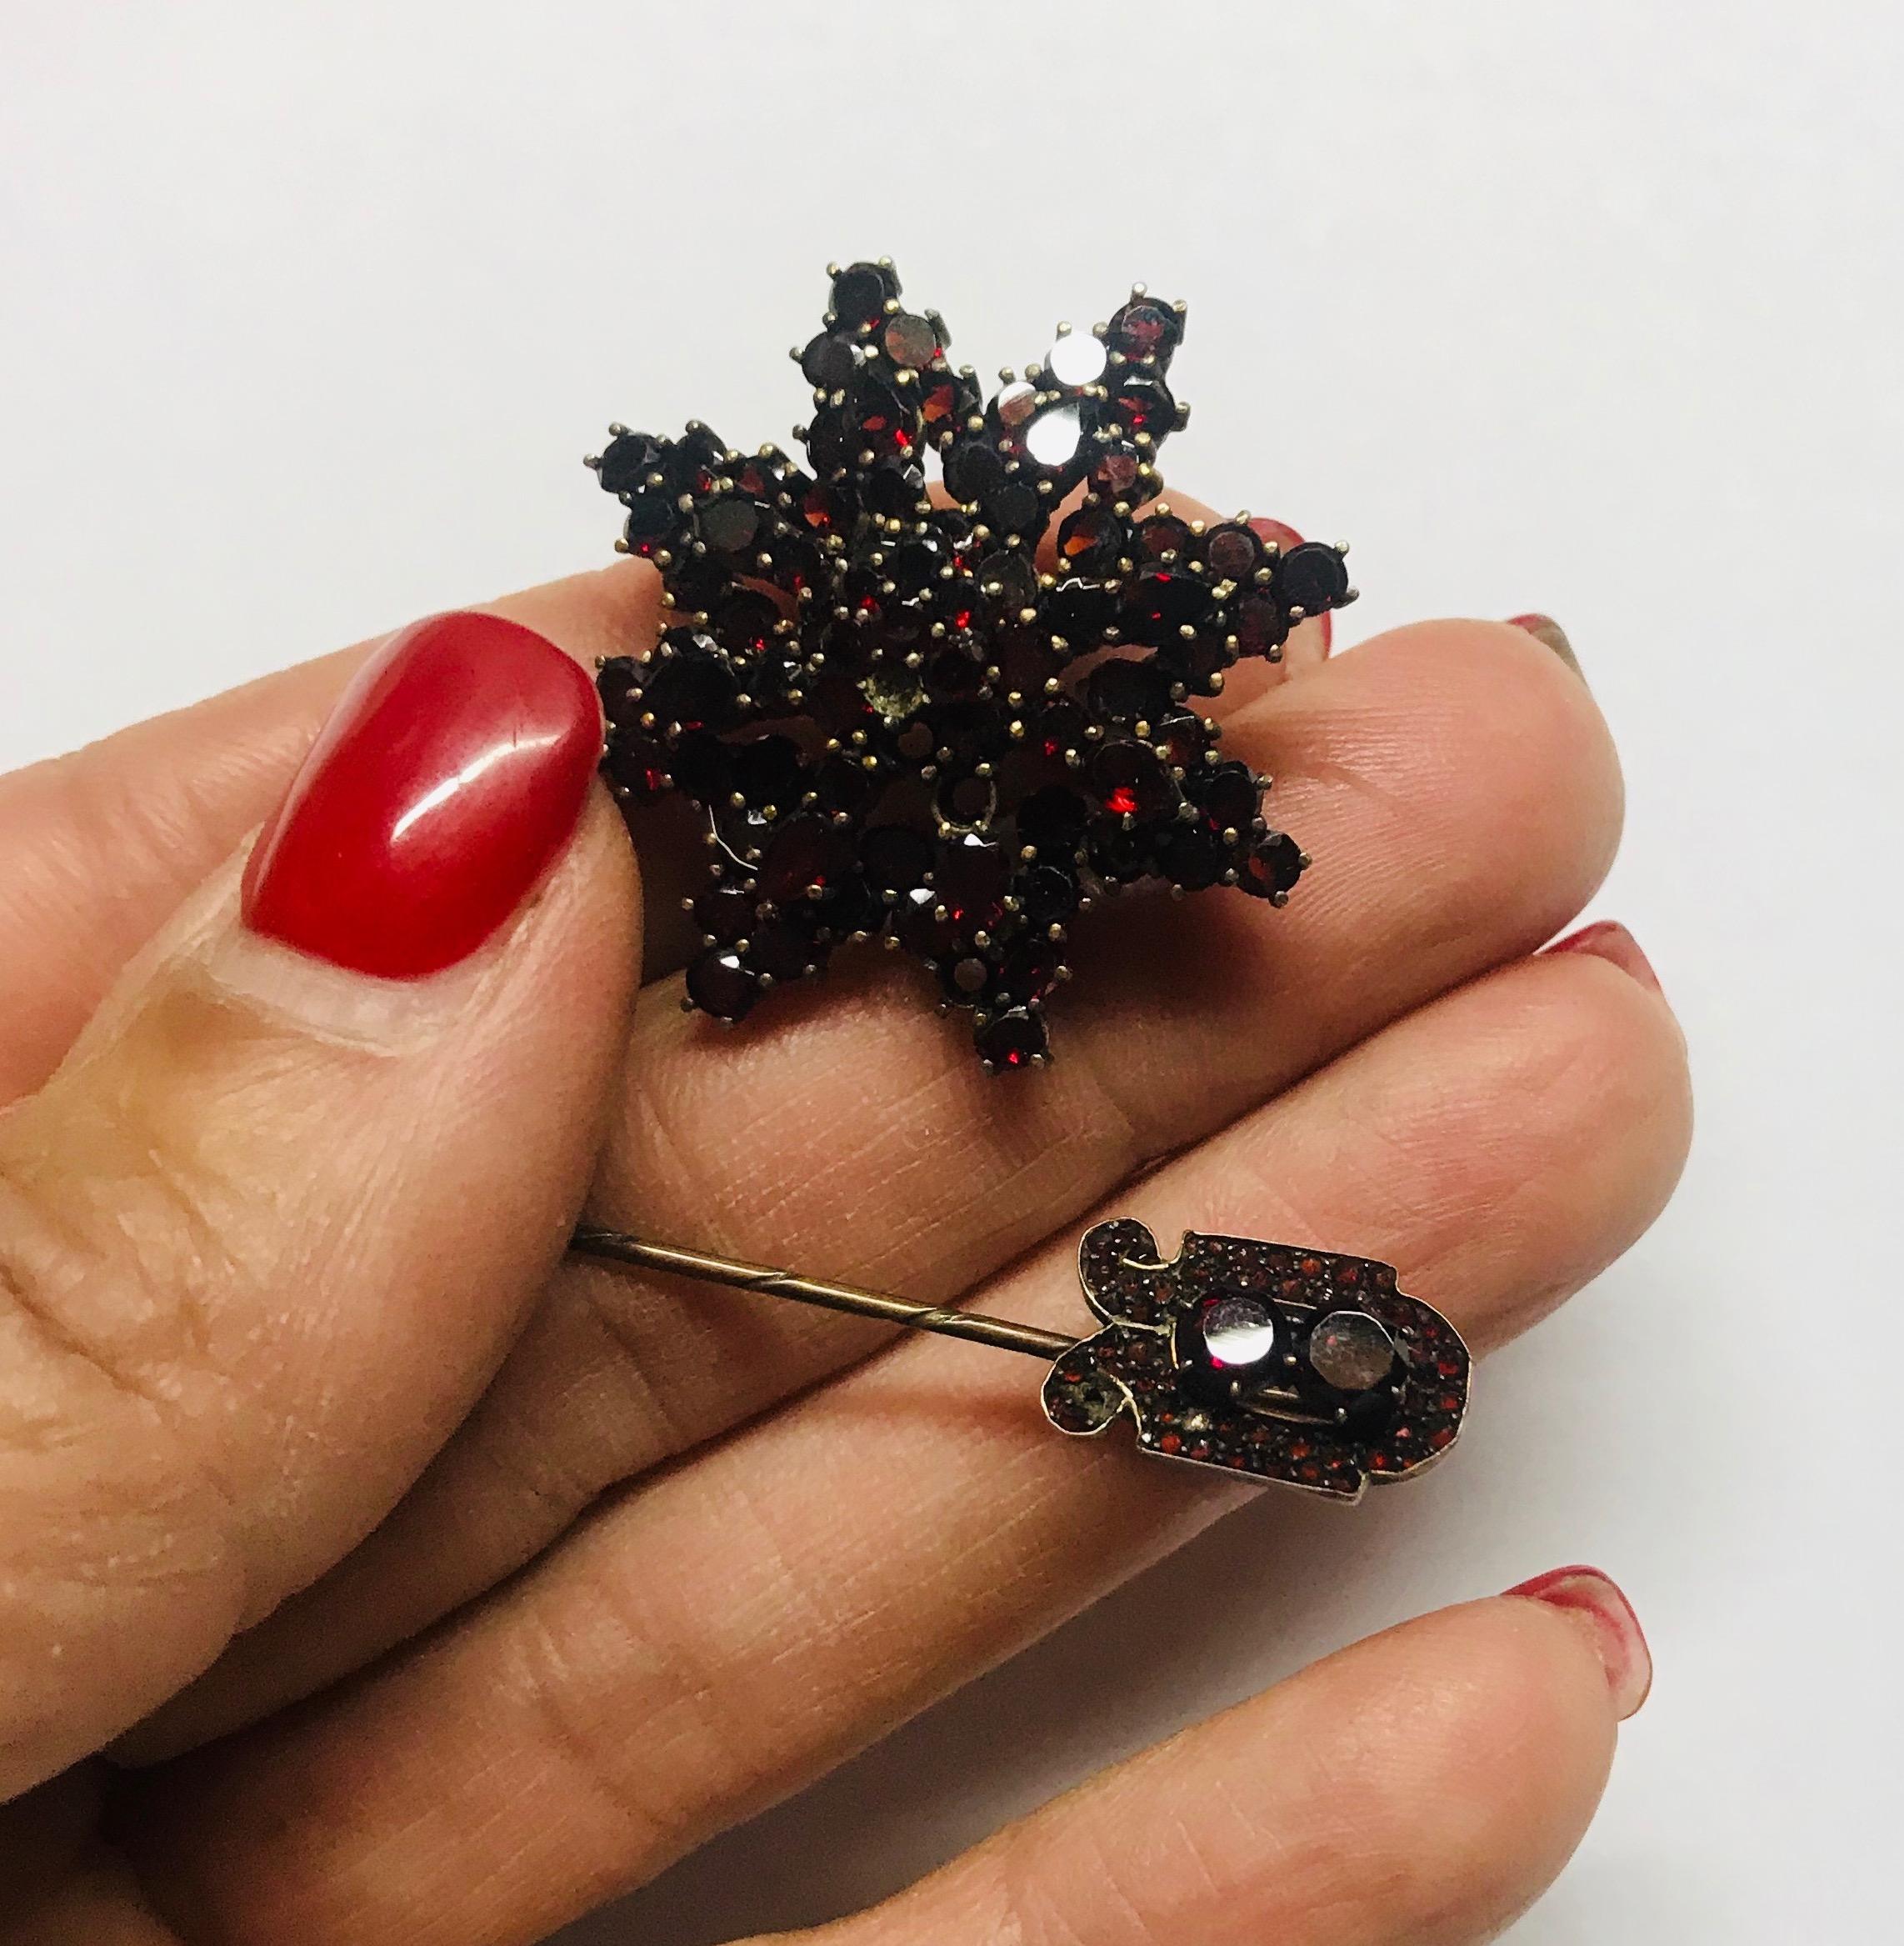 Oveka, 1920's Garnet Pn Set Victorian Era Large Starburst measures 1-1/2 inch diameter Round garnets and Pear Shaped garnets,  set in prongs. Hallmarked Oveka and is tested as 12 karat yellow gold Pin measures 2 inch length with antique cut round